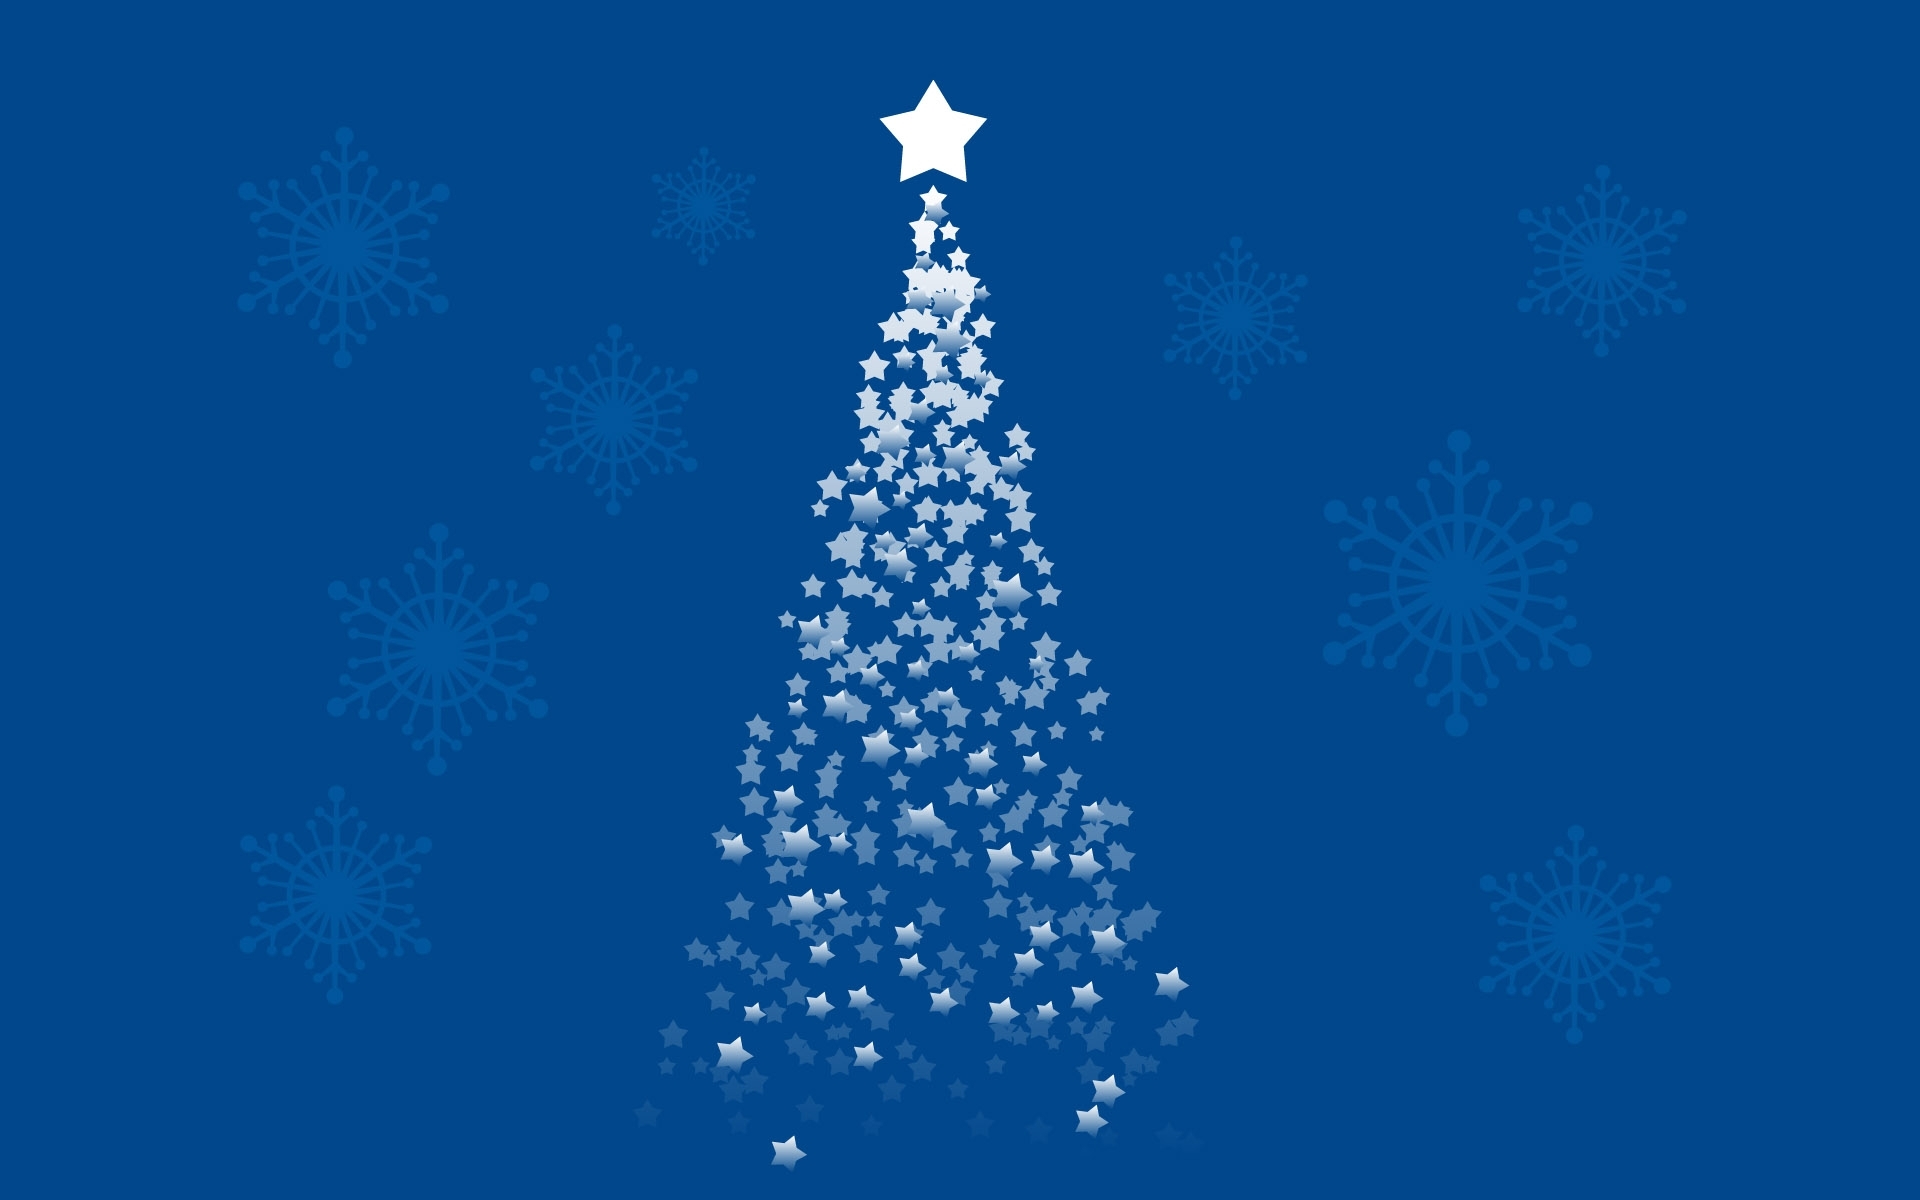 pictures, christmas xmas, holidays, stars, new year, fir trees, blue